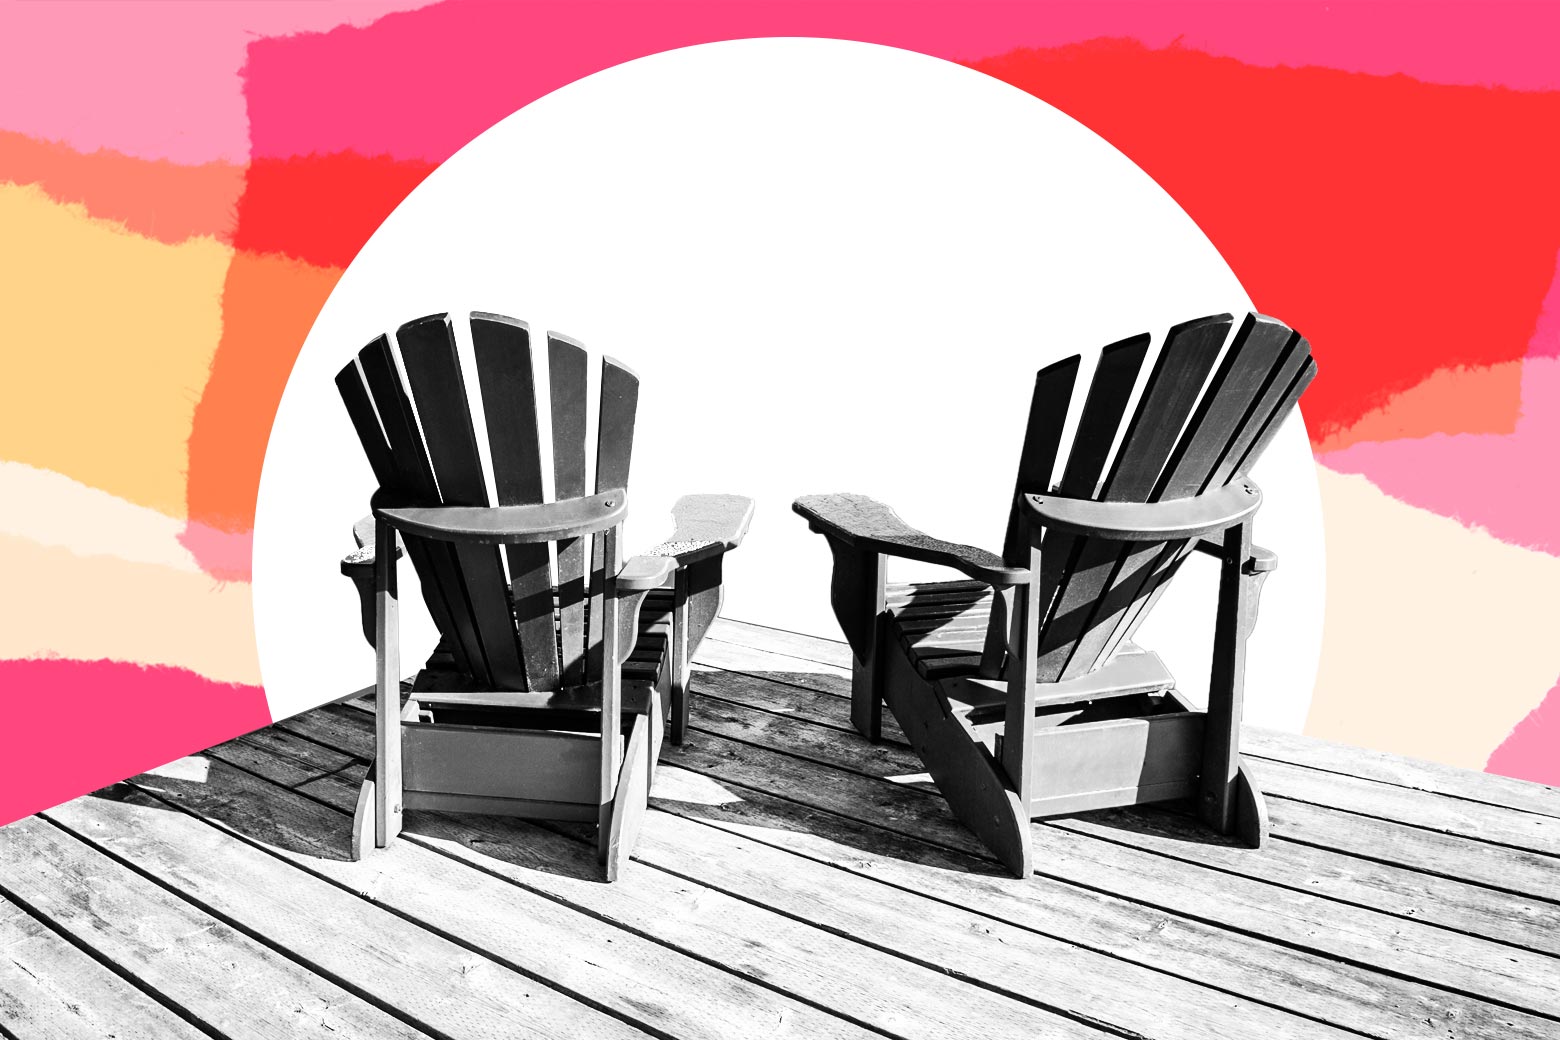 Two deck chairs sitting next to each other